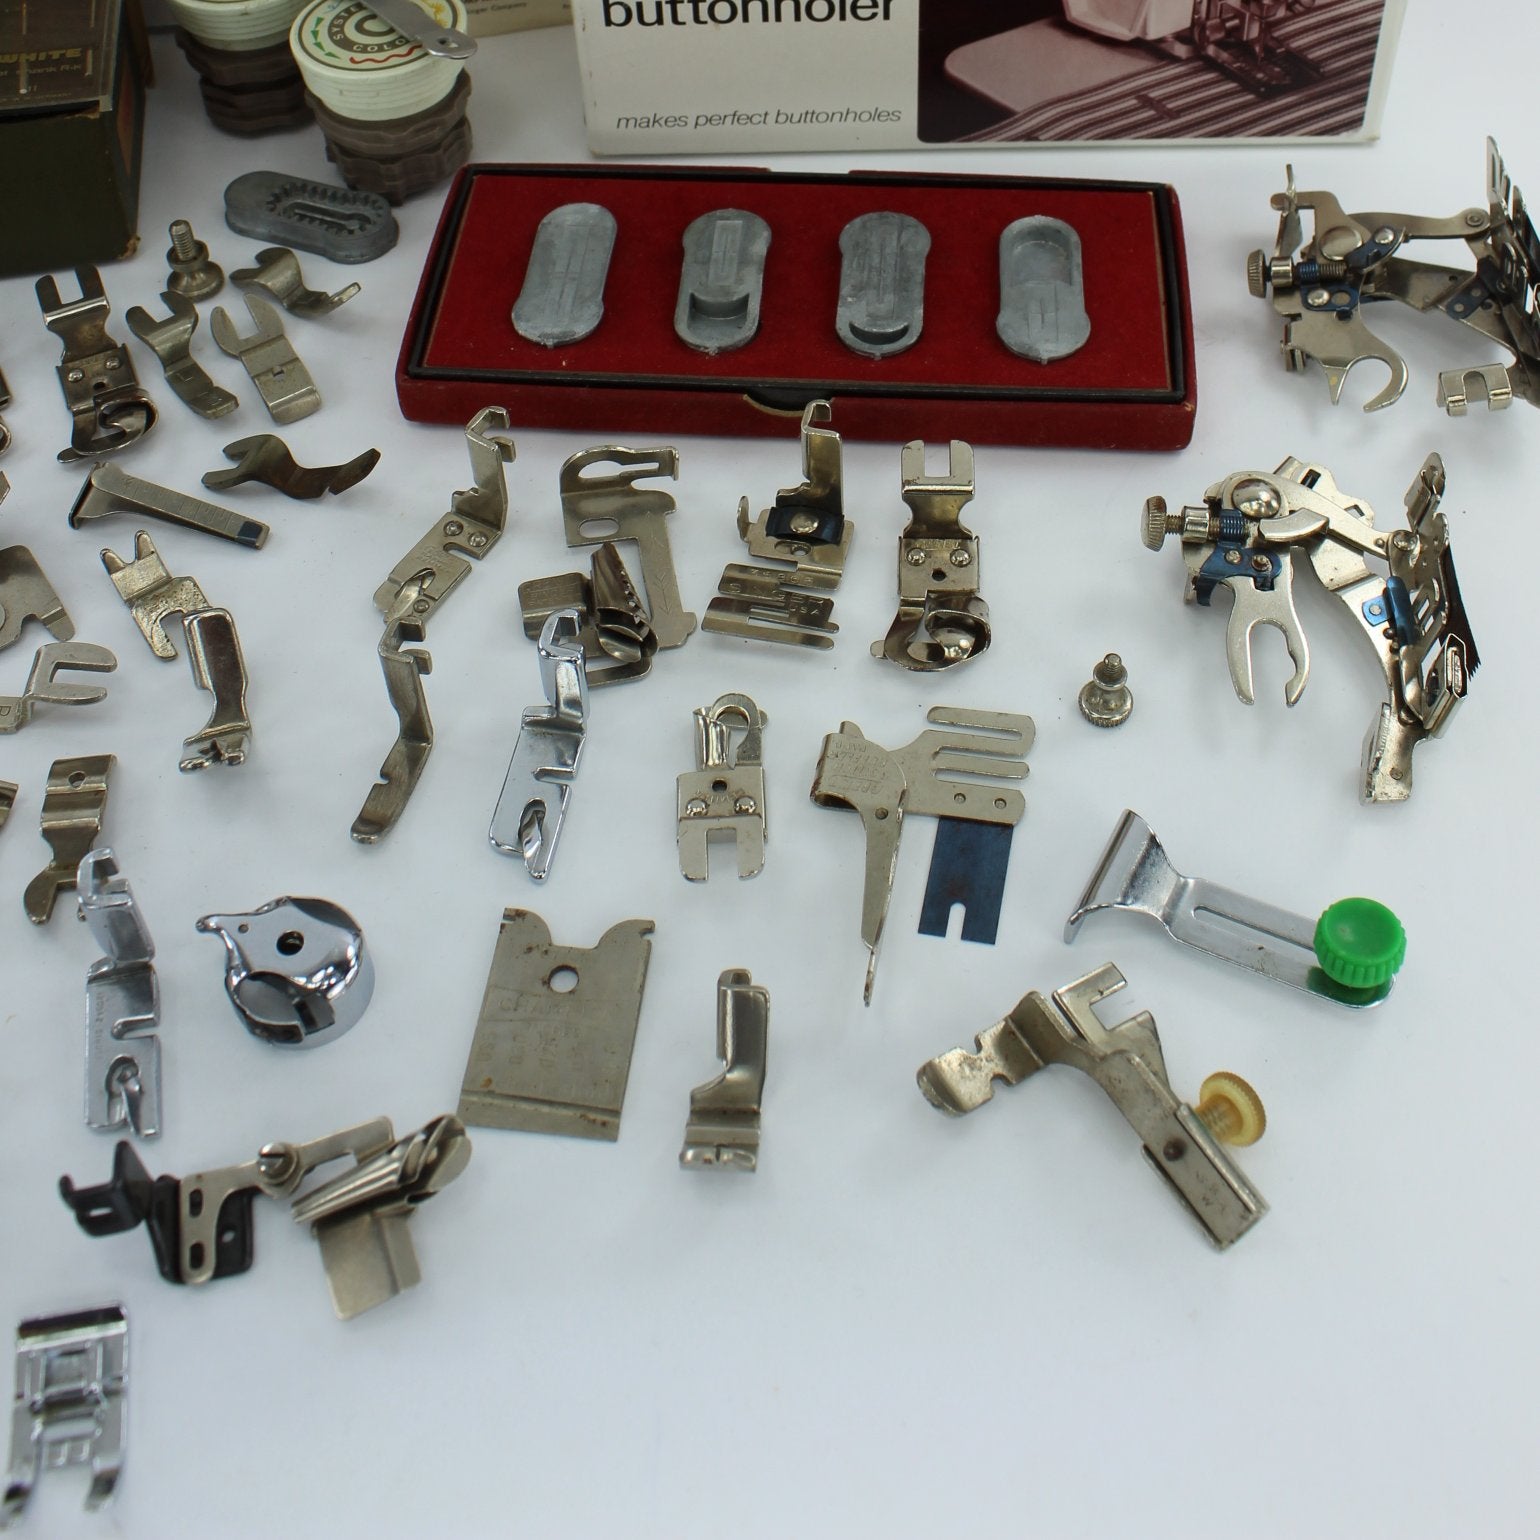 Lot 90 Sewing Machine Attachments Bobbins Buttonholers Misc